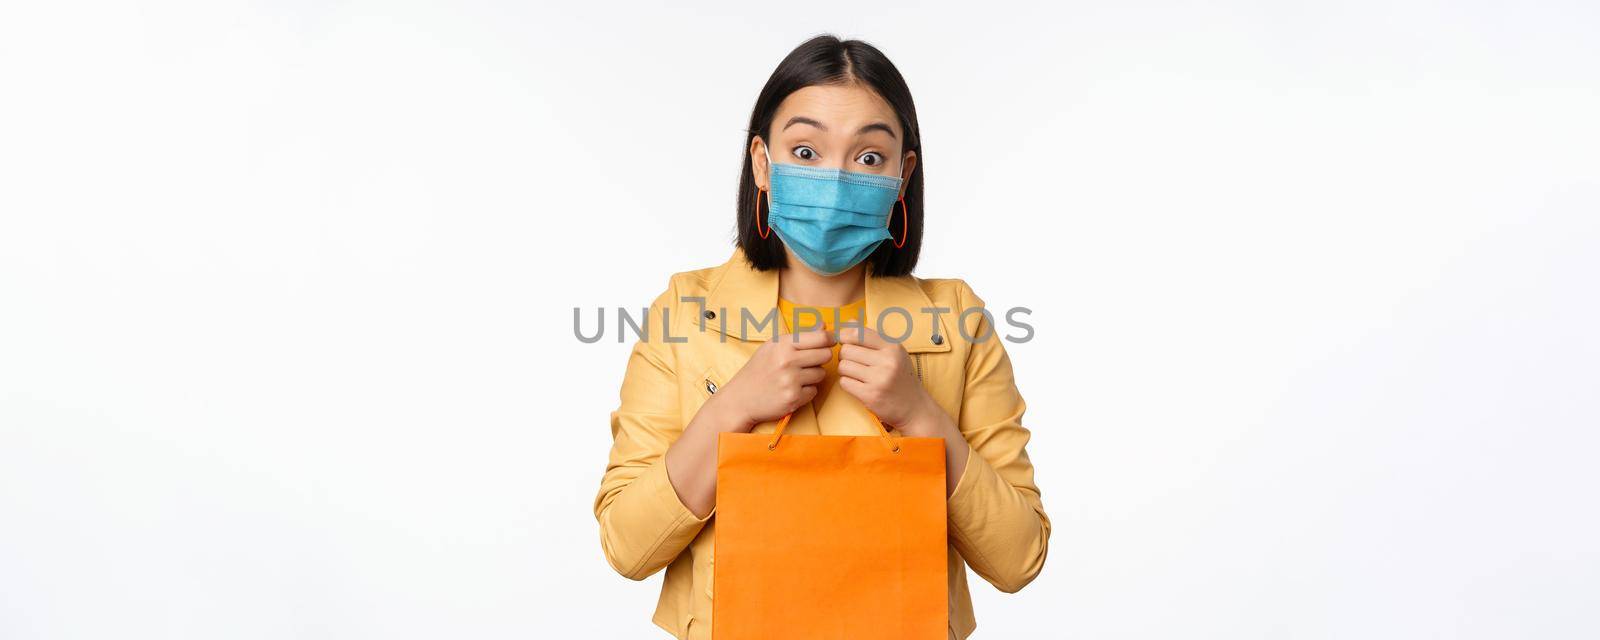 Covid-19 and shop concept. Young asian stylish woman, wearing medical face mask, holding shopping bag, going in malls during pandemic, white background.